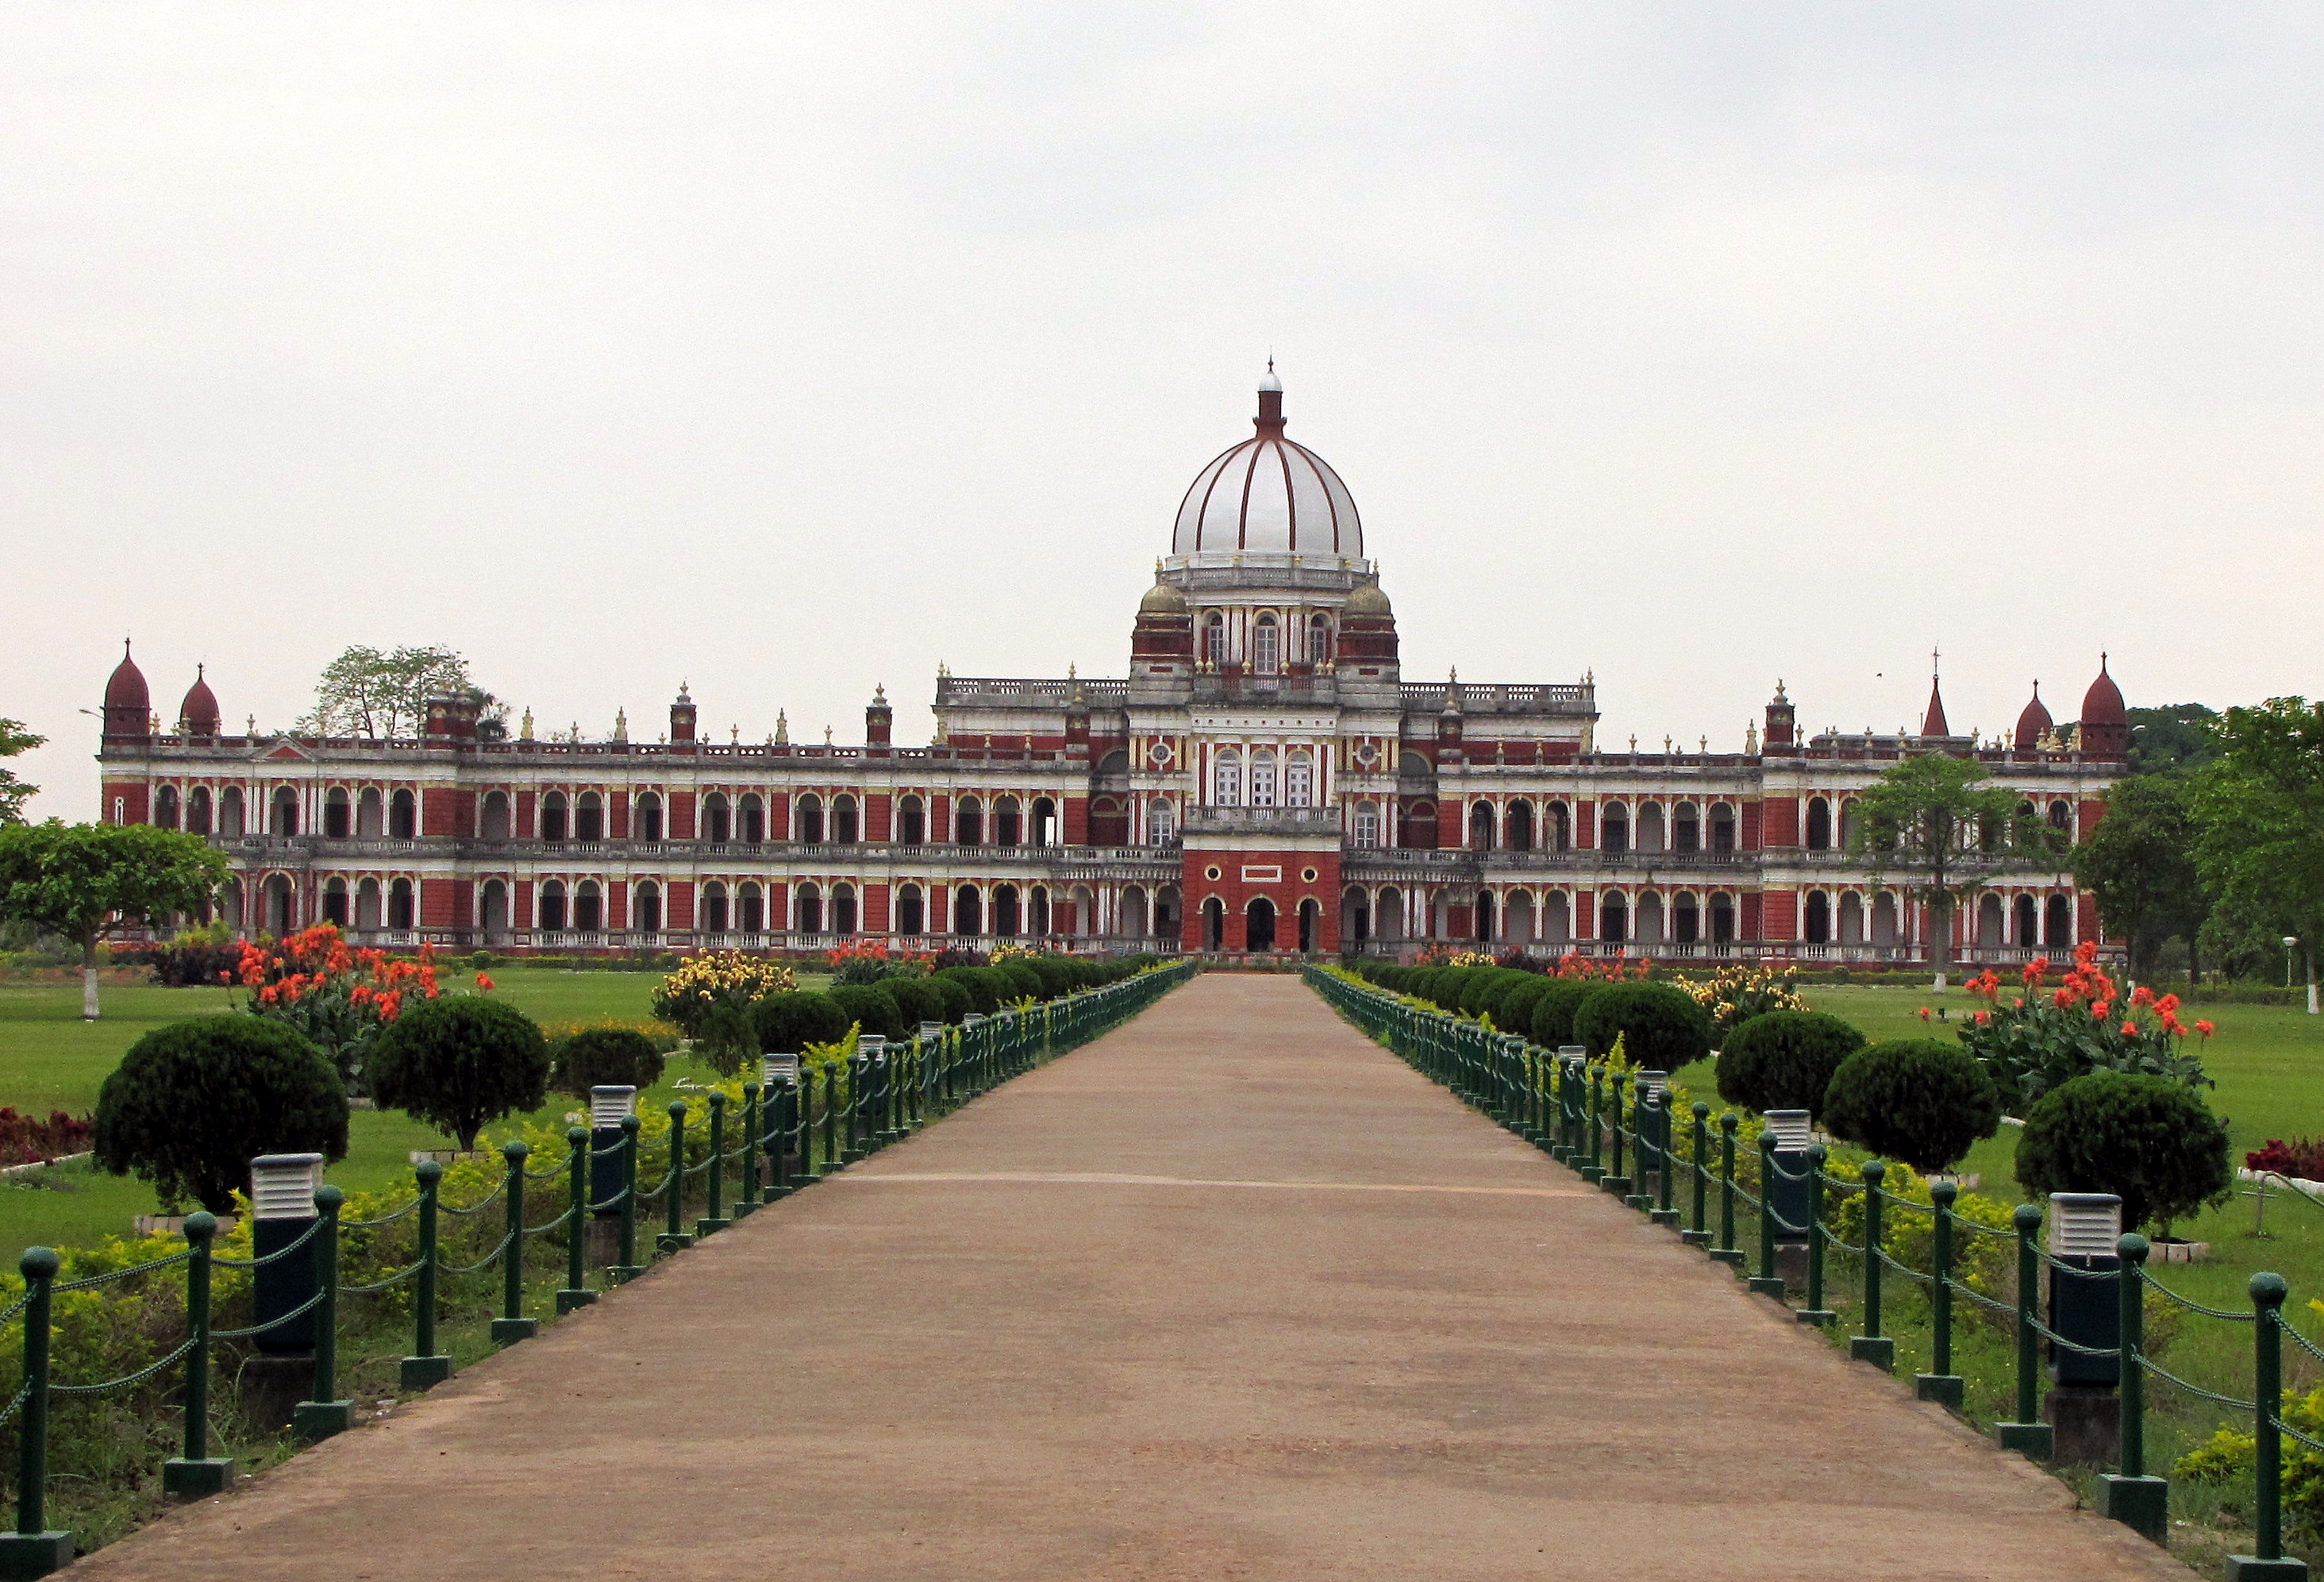 HQ Cooch Behar Palace Wallpapers | File 1431.32Kb